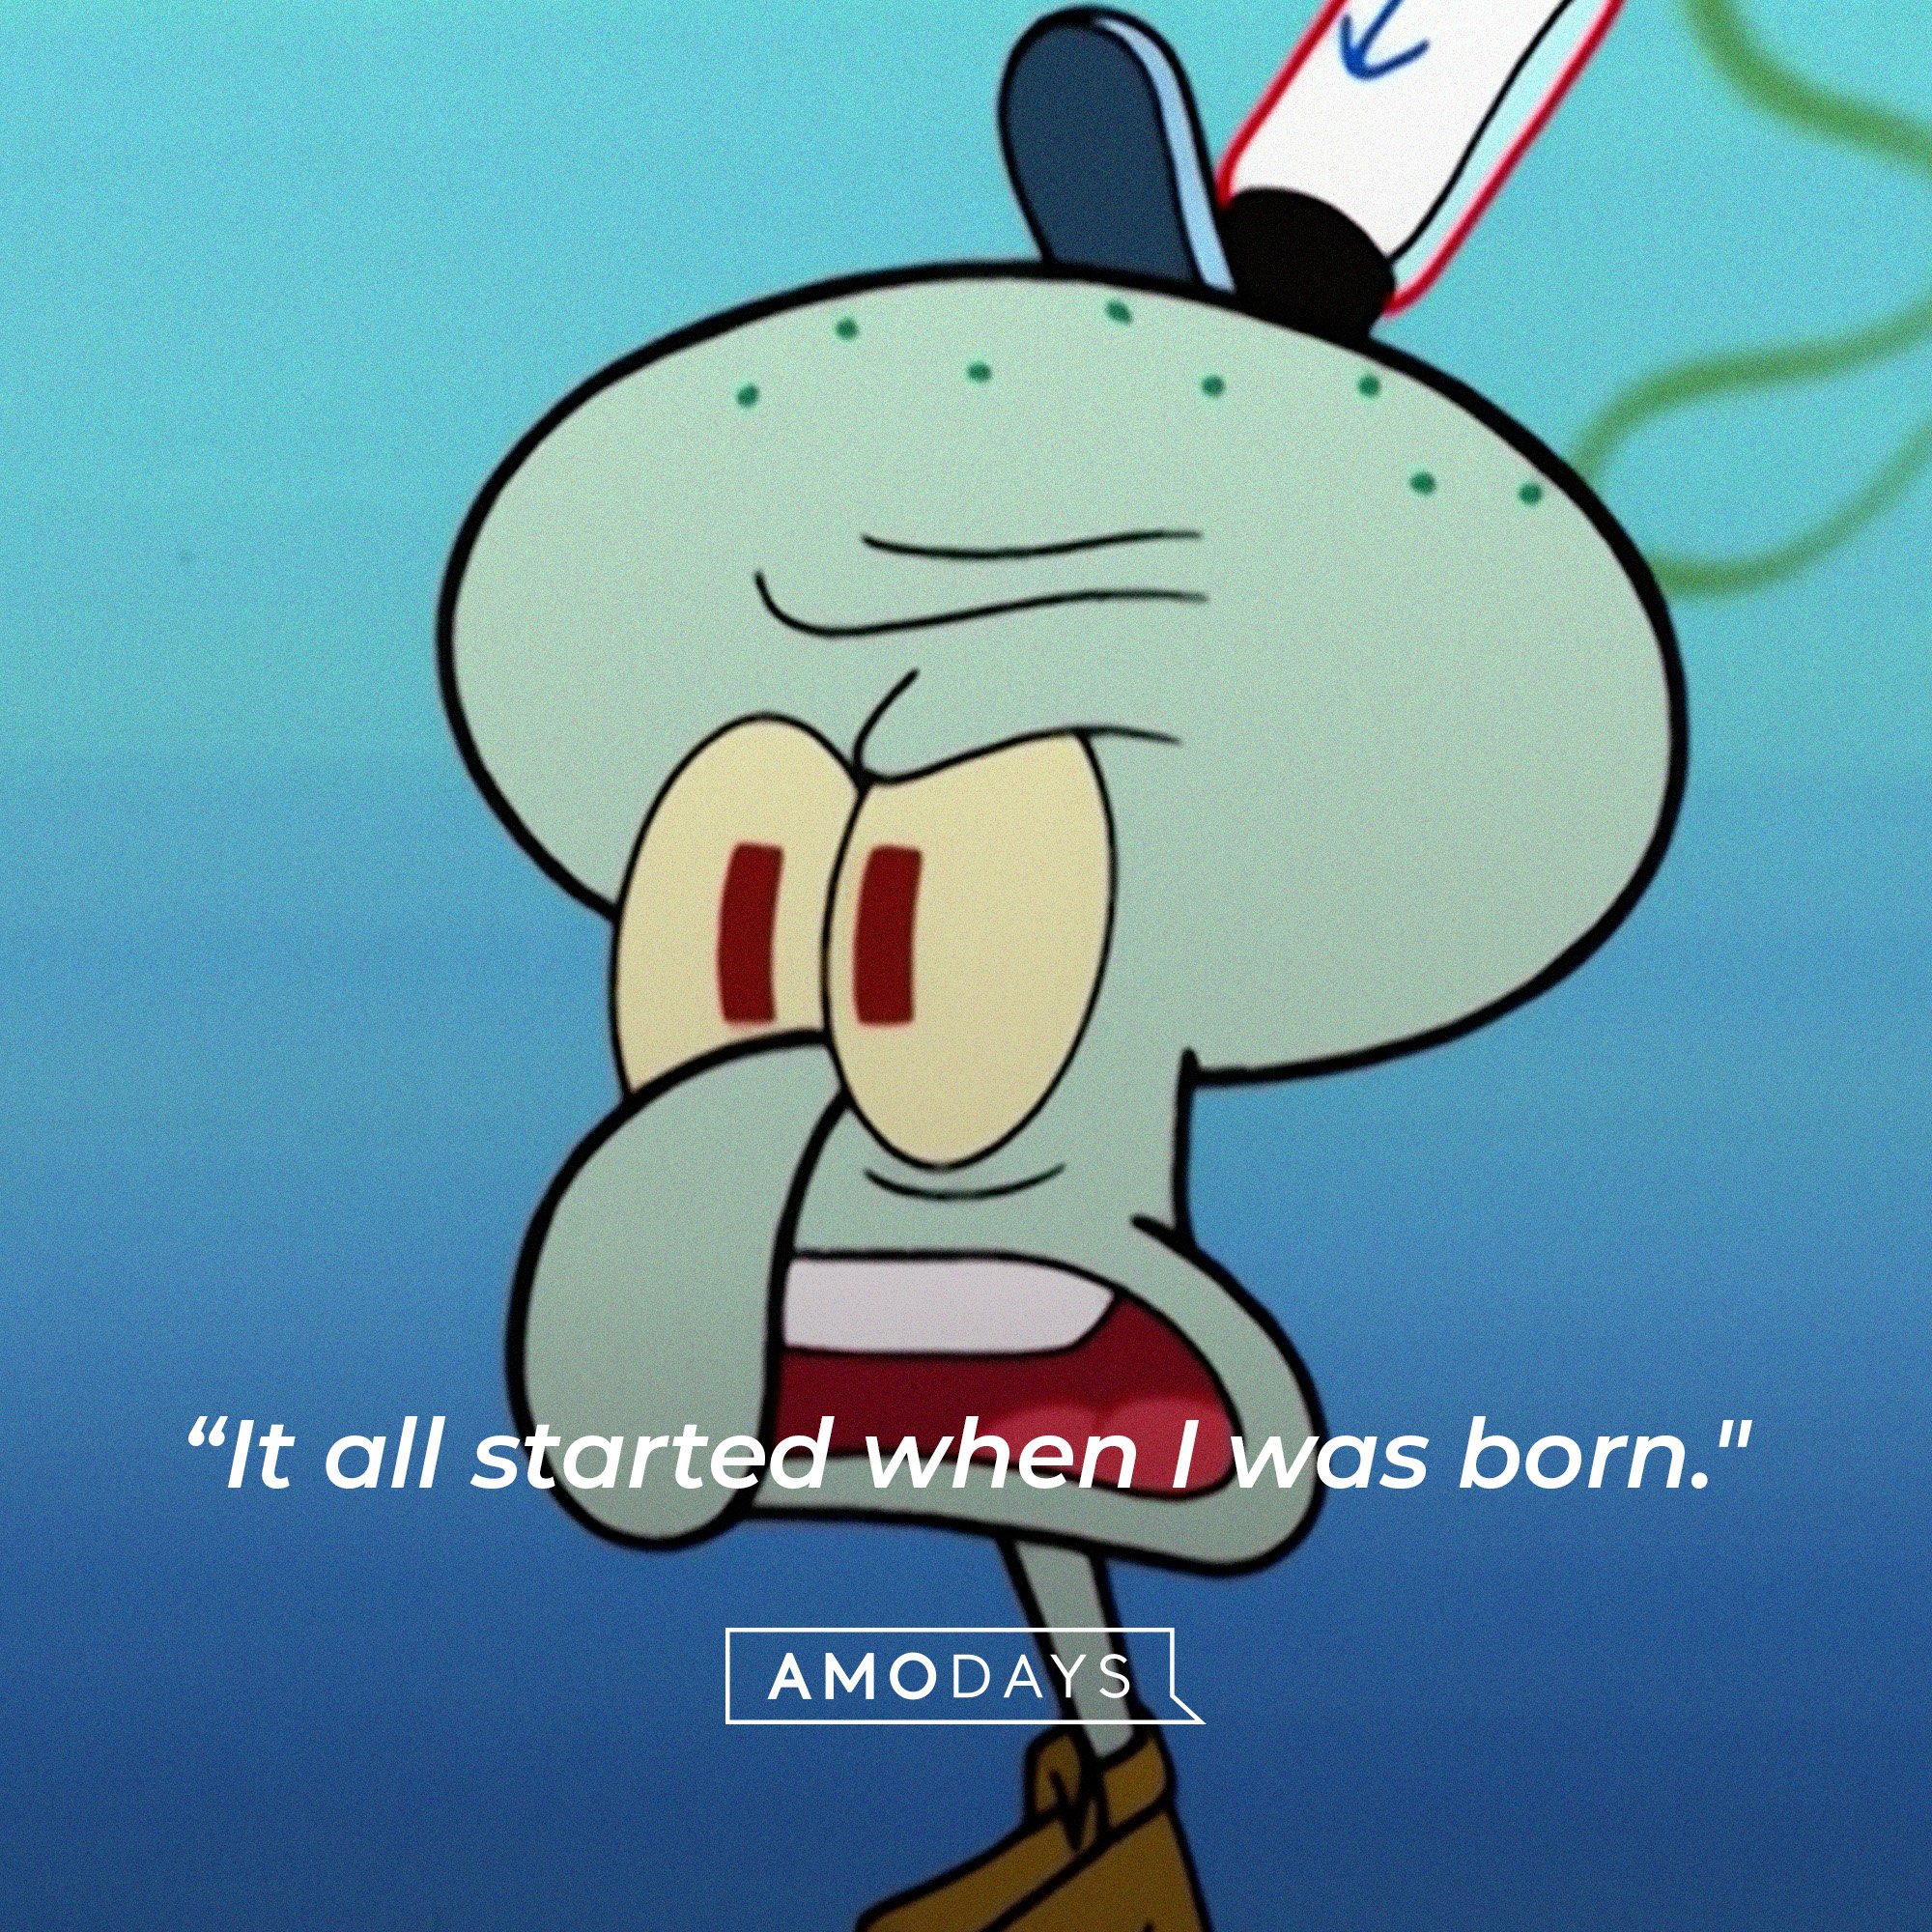 Squidward Tentacles’ quote: "It all started when I was born."  | Source: AmoDays